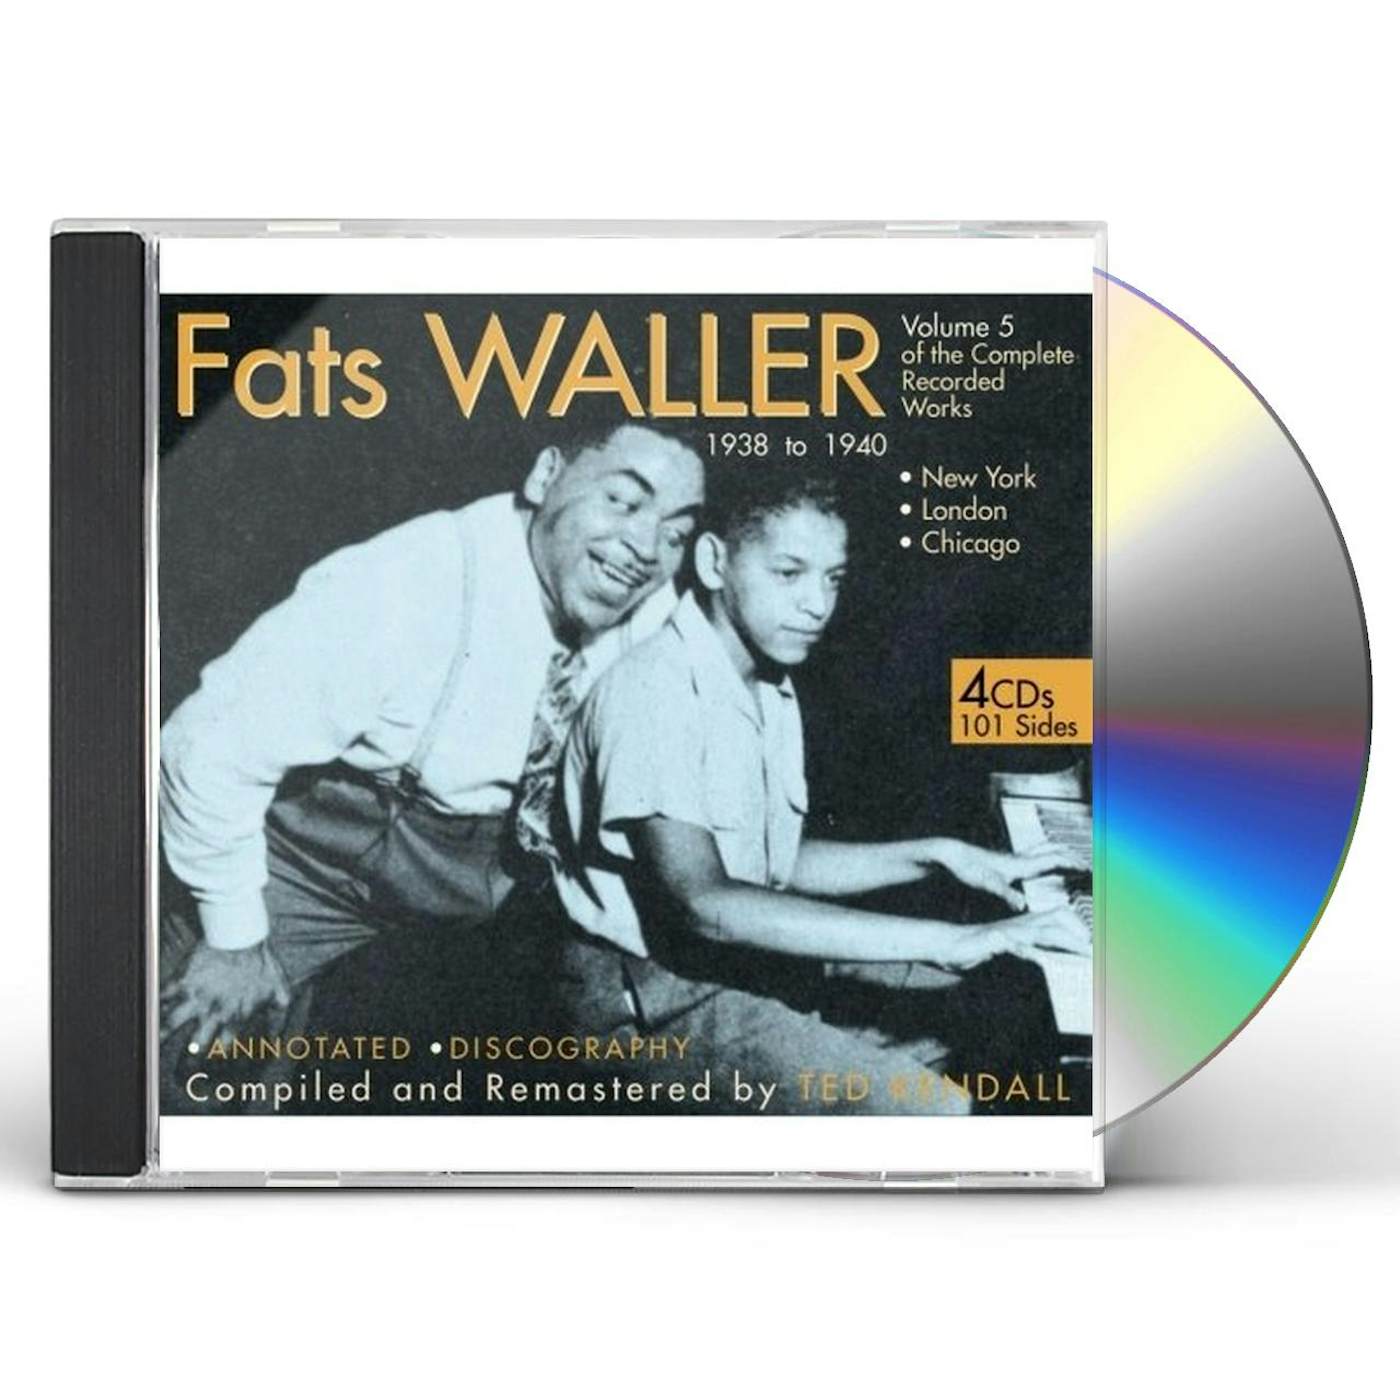 Fats Waller OF THE COMPLETE RECORDED WORKS 1938-40 5 CD